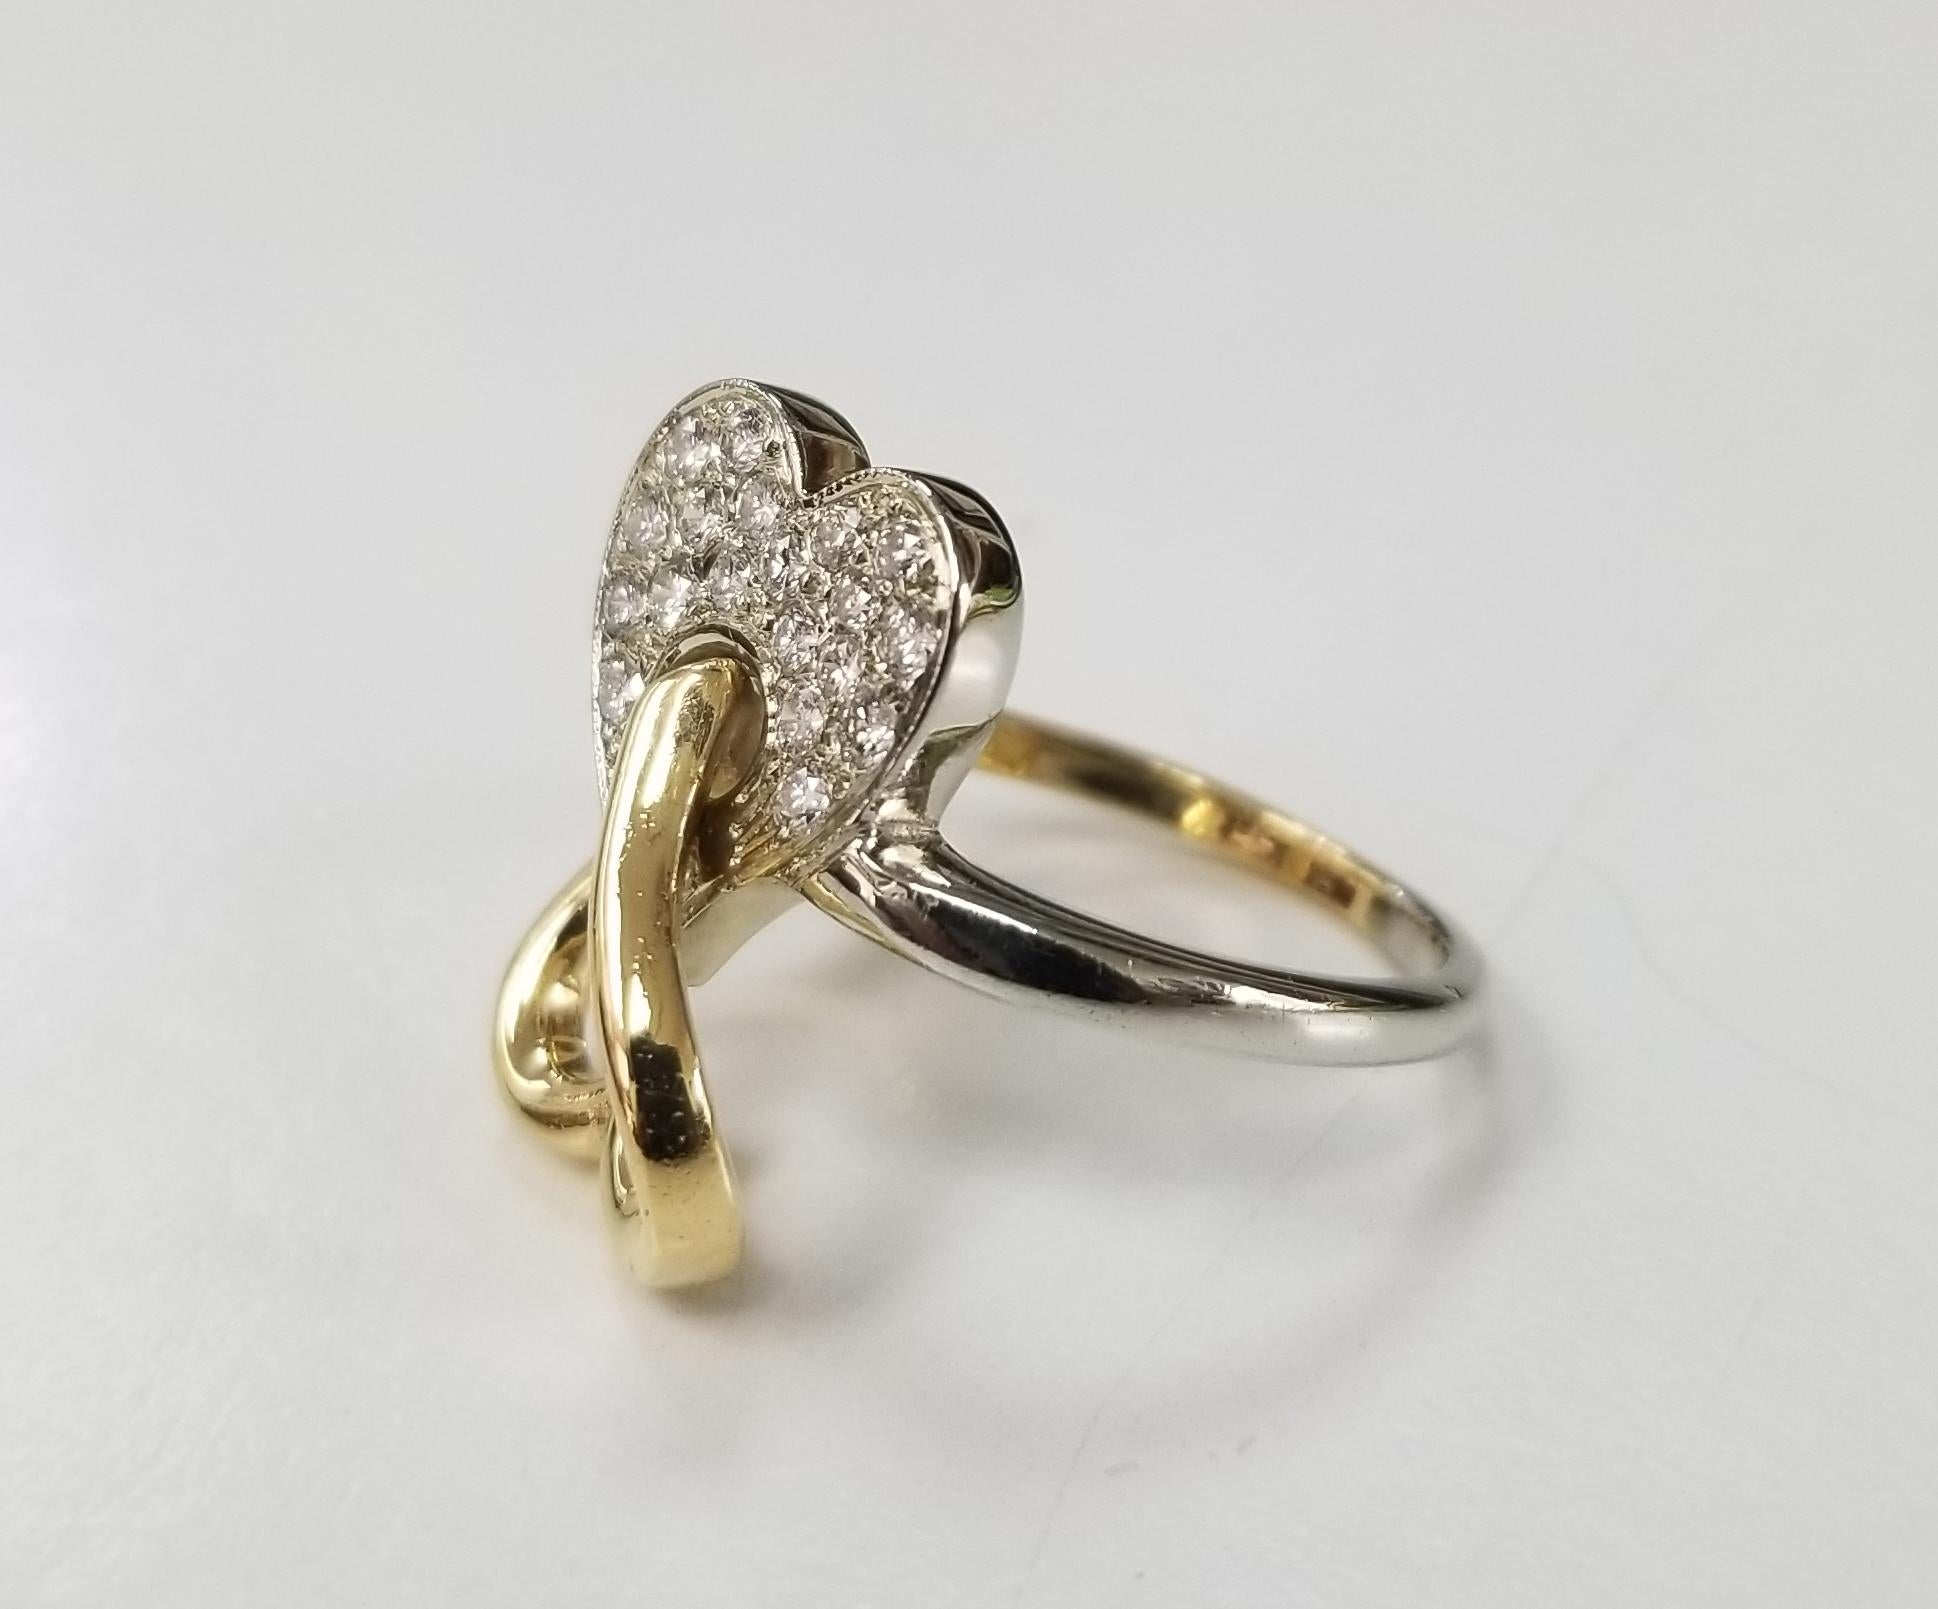 18 karat 2 tone diamond heart ring, containing 21 round full cut diamonds of very fine quality weighing .35pts.  the ring is 2 tone and a double heart.  ring is size 6 1/2 and can be sized to fit for free.